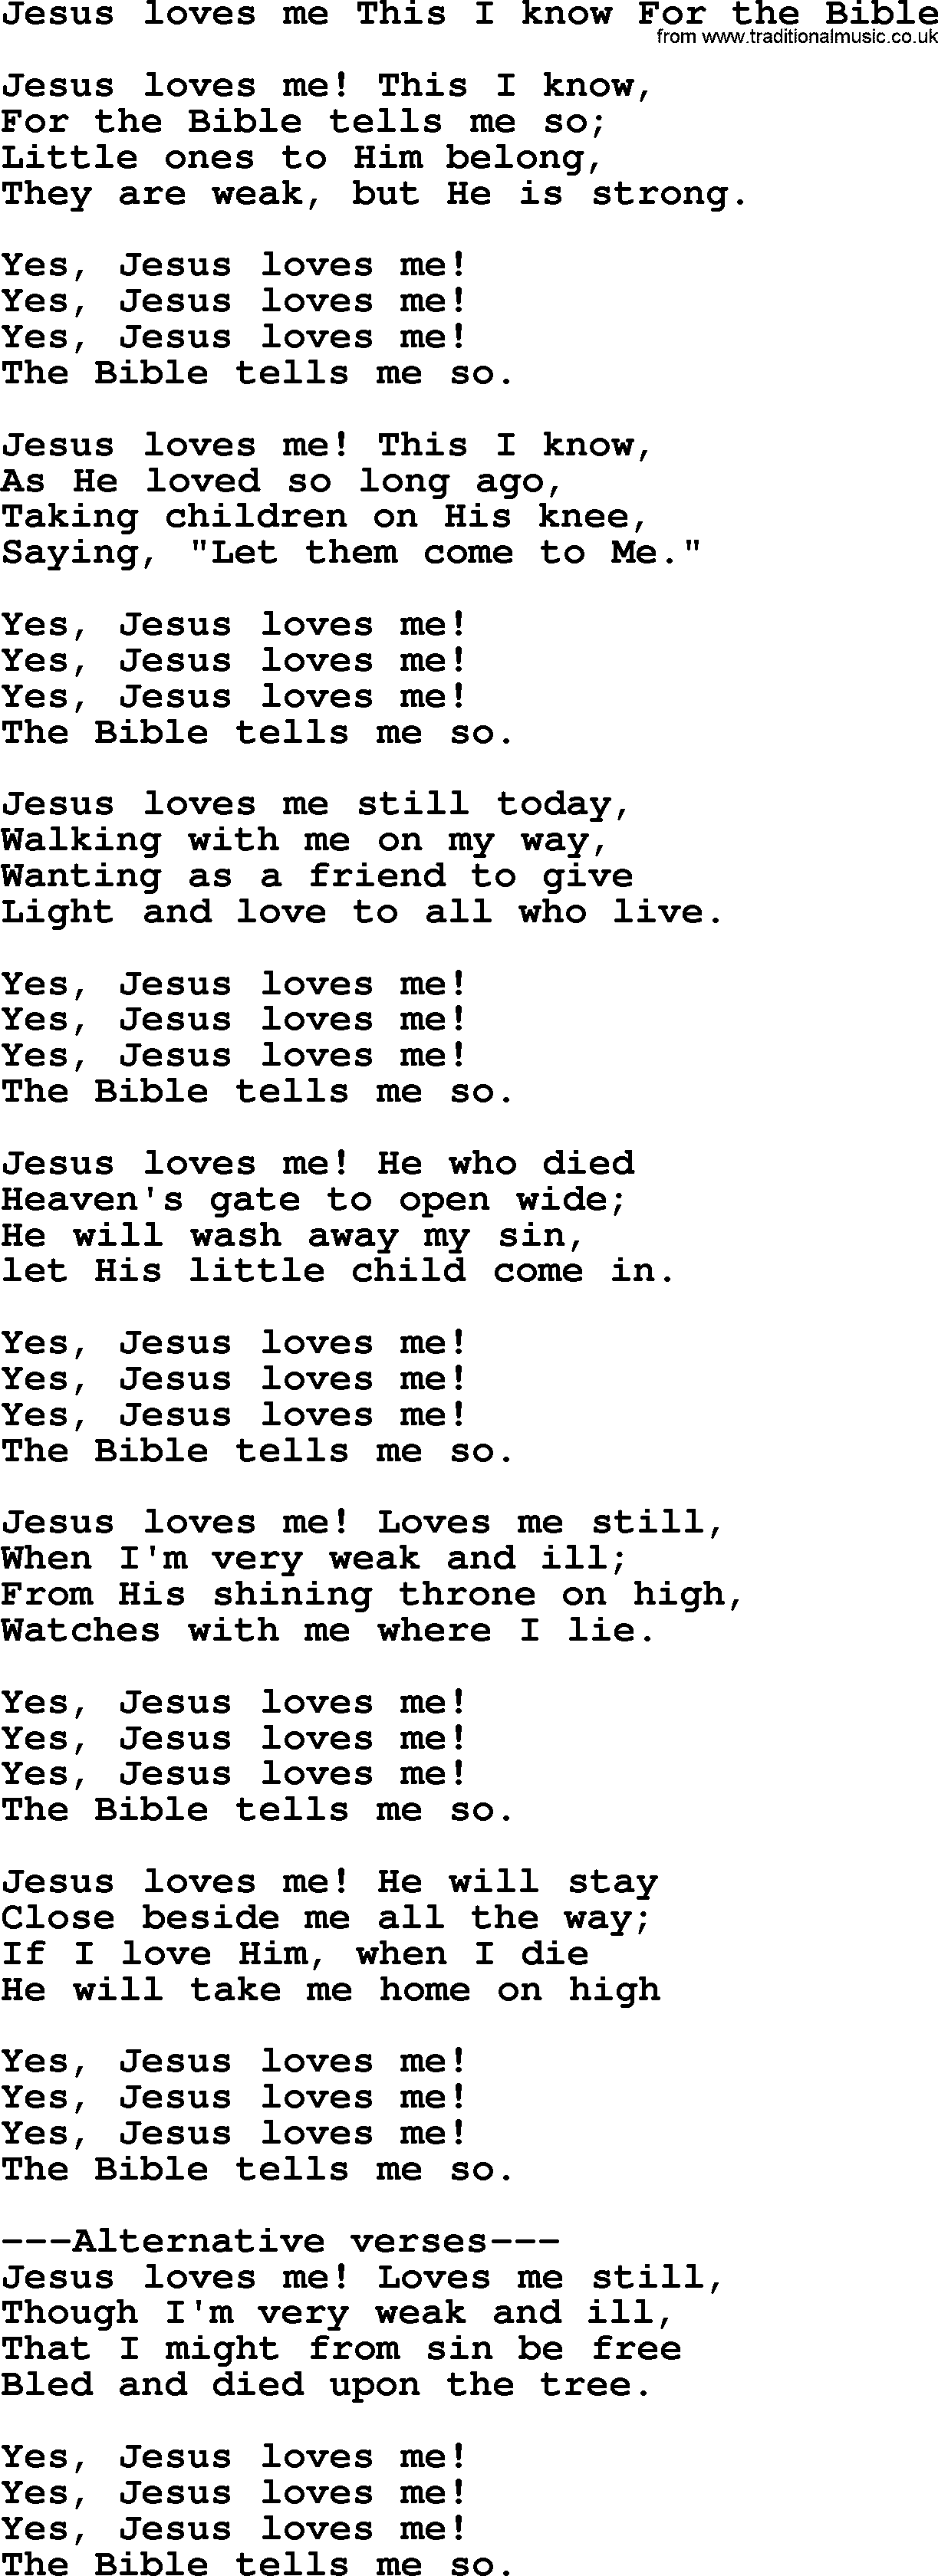 Sacred Songs and Solos complete, 1200 Hymns, title: Jesus Loves Me This I Know For The Bible, lyrics and PDF